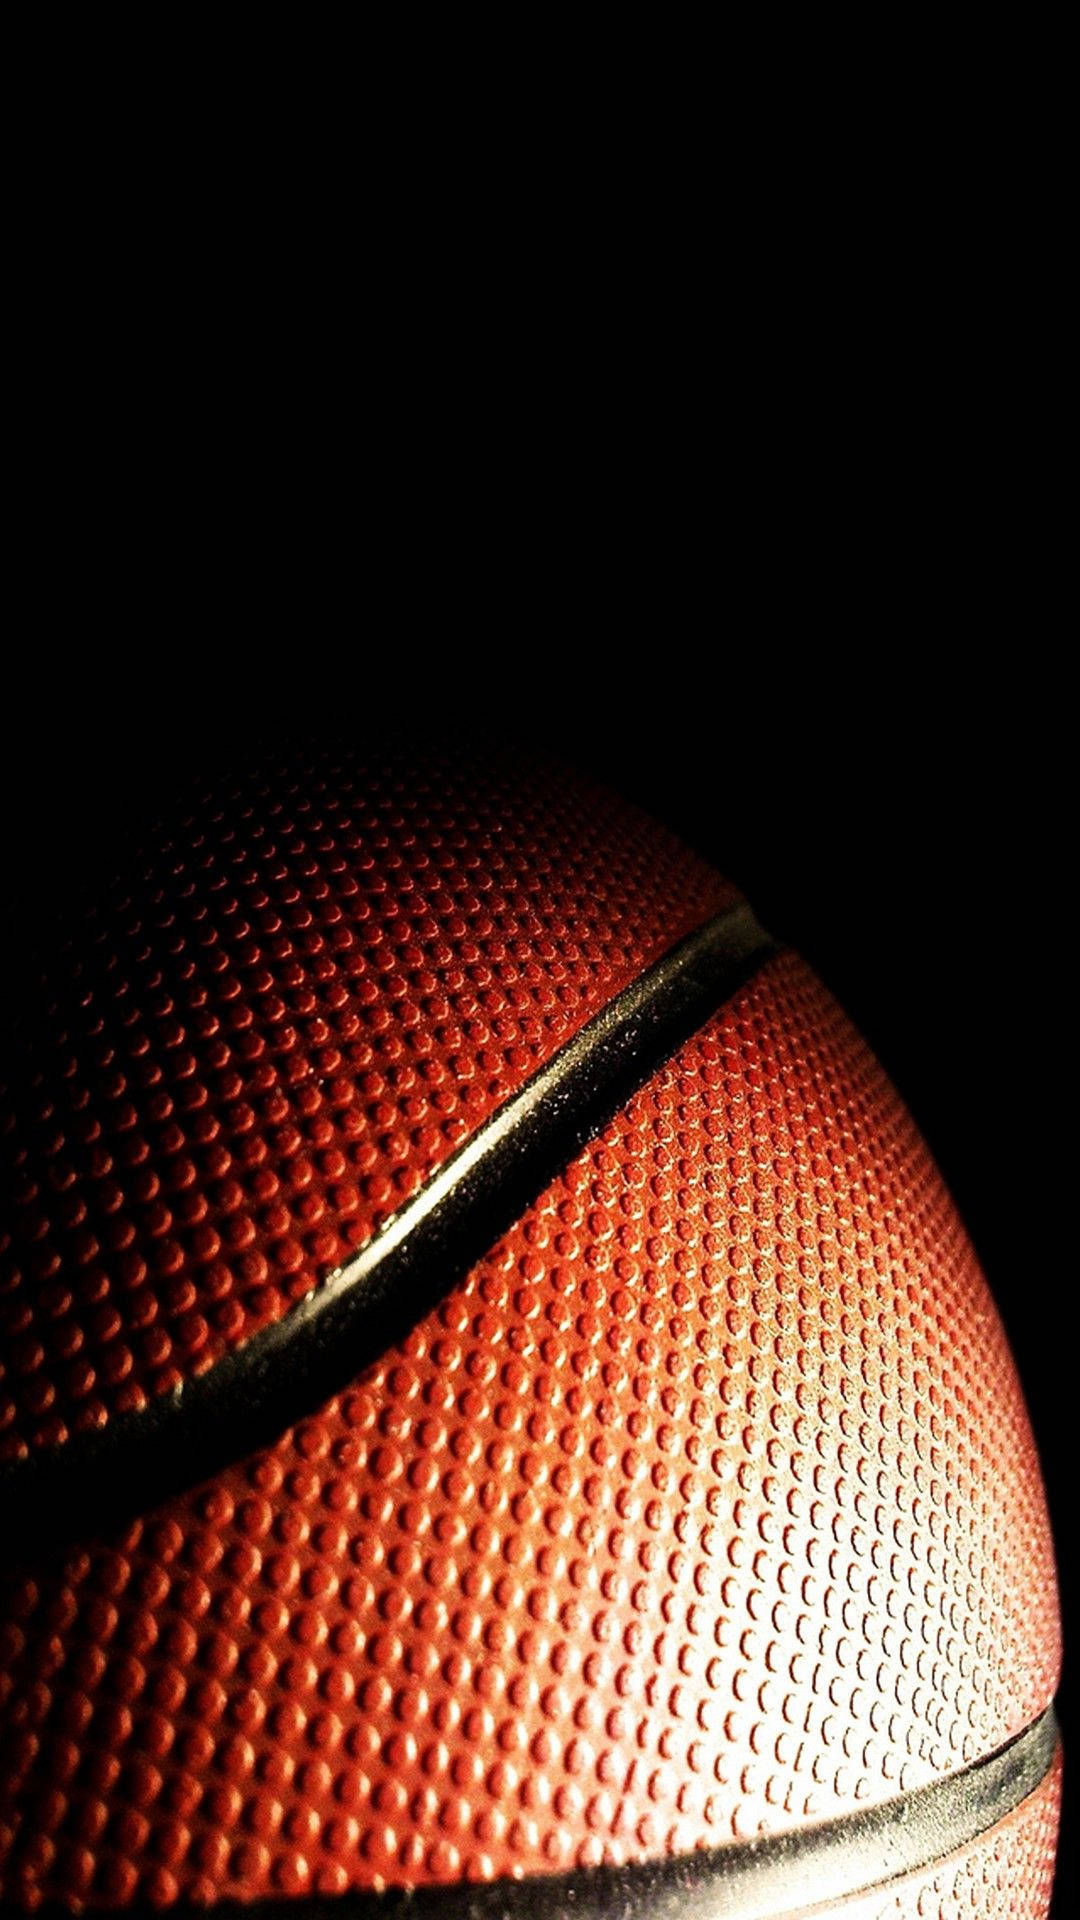 Nba Iphone Basketball In The Shadows Background